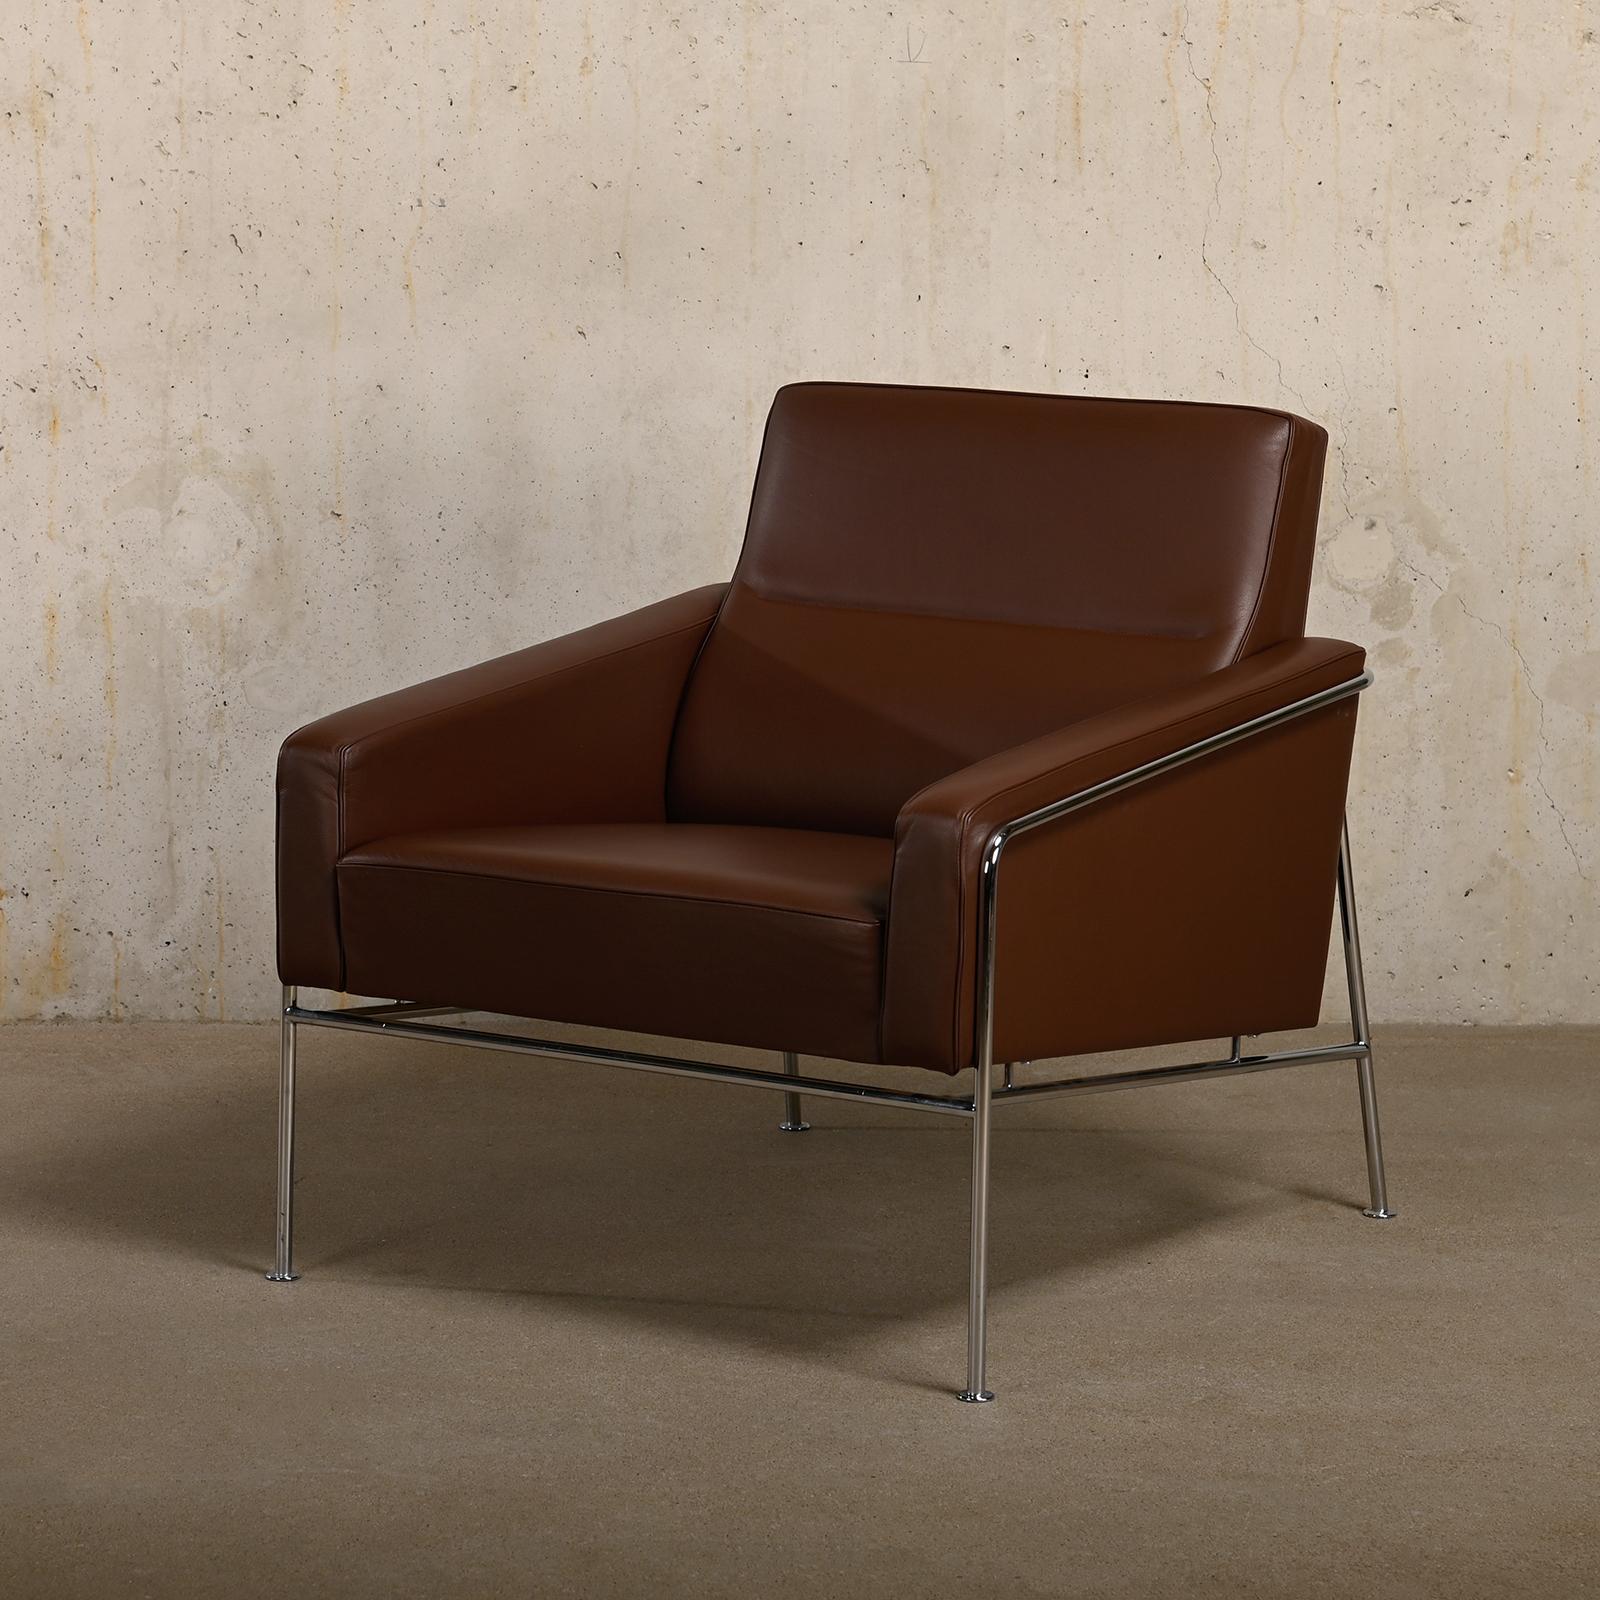 Mid-20th Century Arne Jacobsen Pair Armchairs 3300 Series in Chestnut leather for Fritz Hansen For Sale